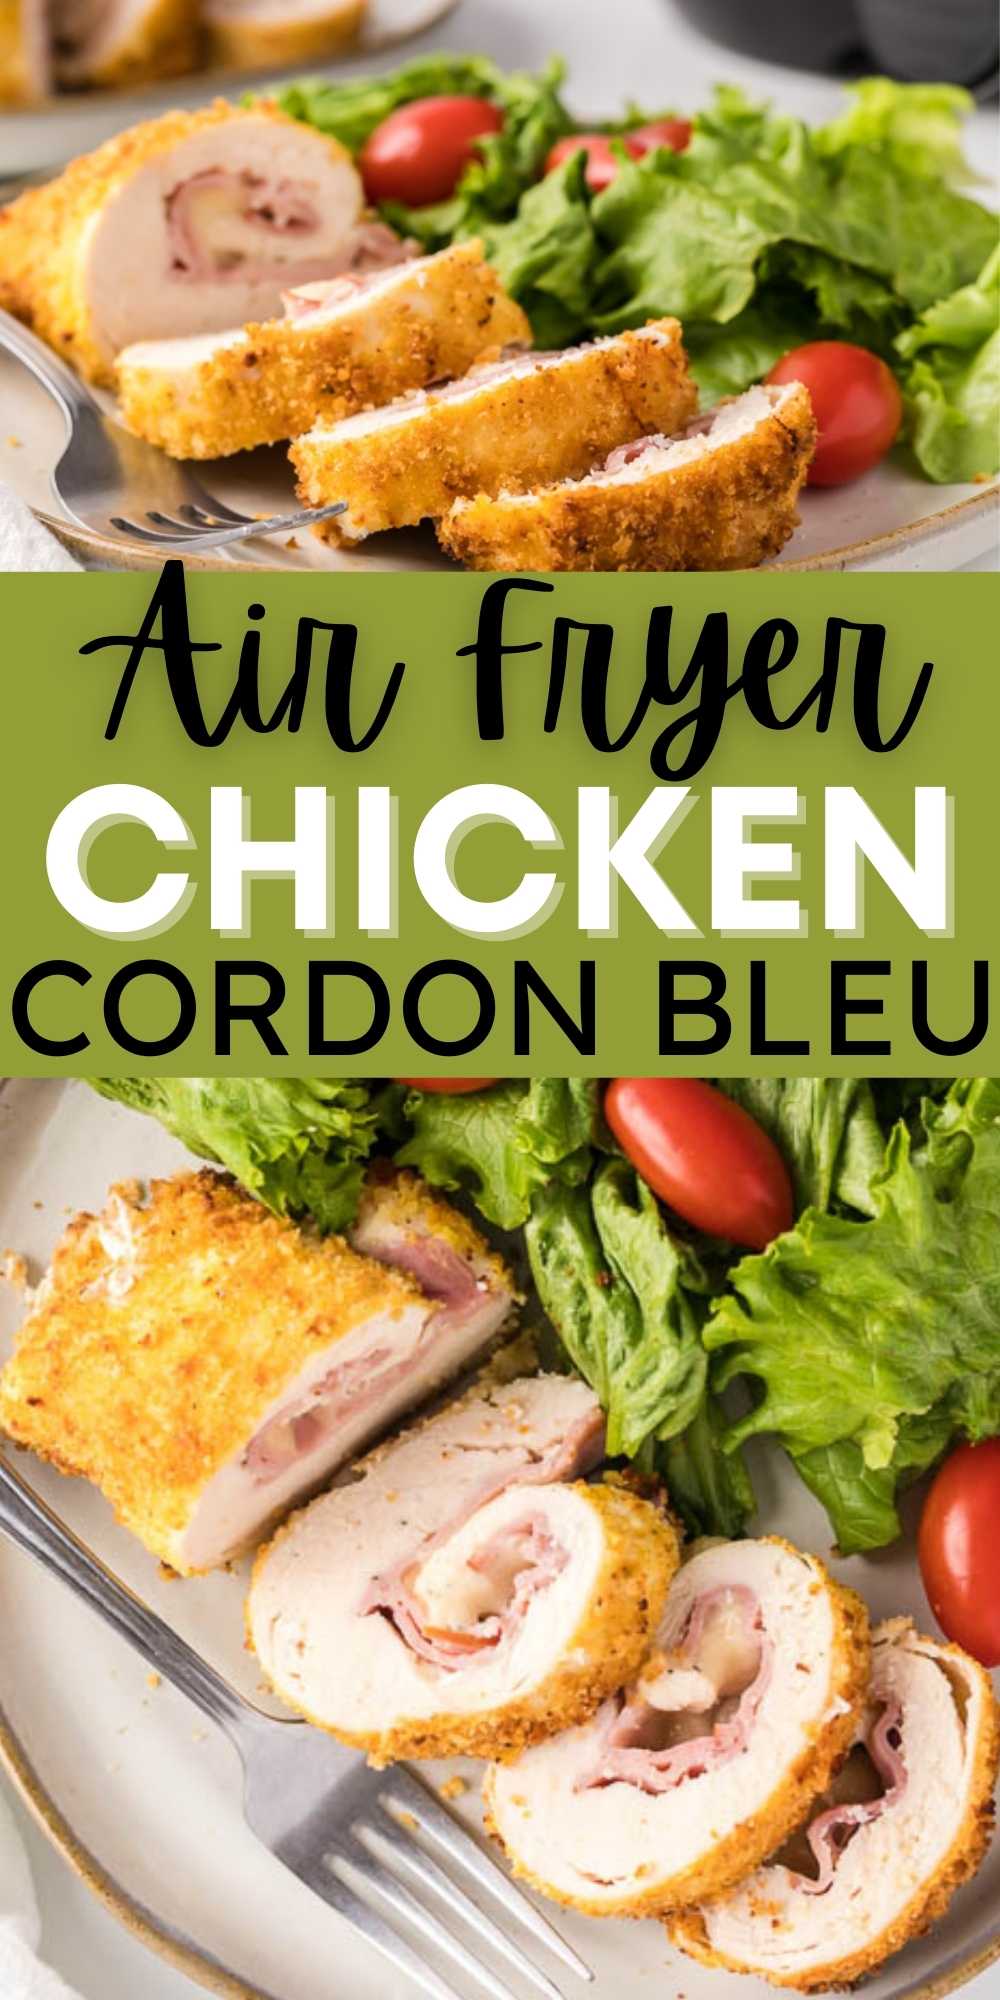 Air Fryer Chicken Cordon Bleu is a great way to jazz up a chicken. It has layers of ham and Swiss cheese and is air fried to perfection. This Chicken Cordon Bleu is healthy when made in the air fryer and it’s still super easy to make too.  #eatingonadime #airfryerrecipes #chickenrecipes #chickencordonbleu 
